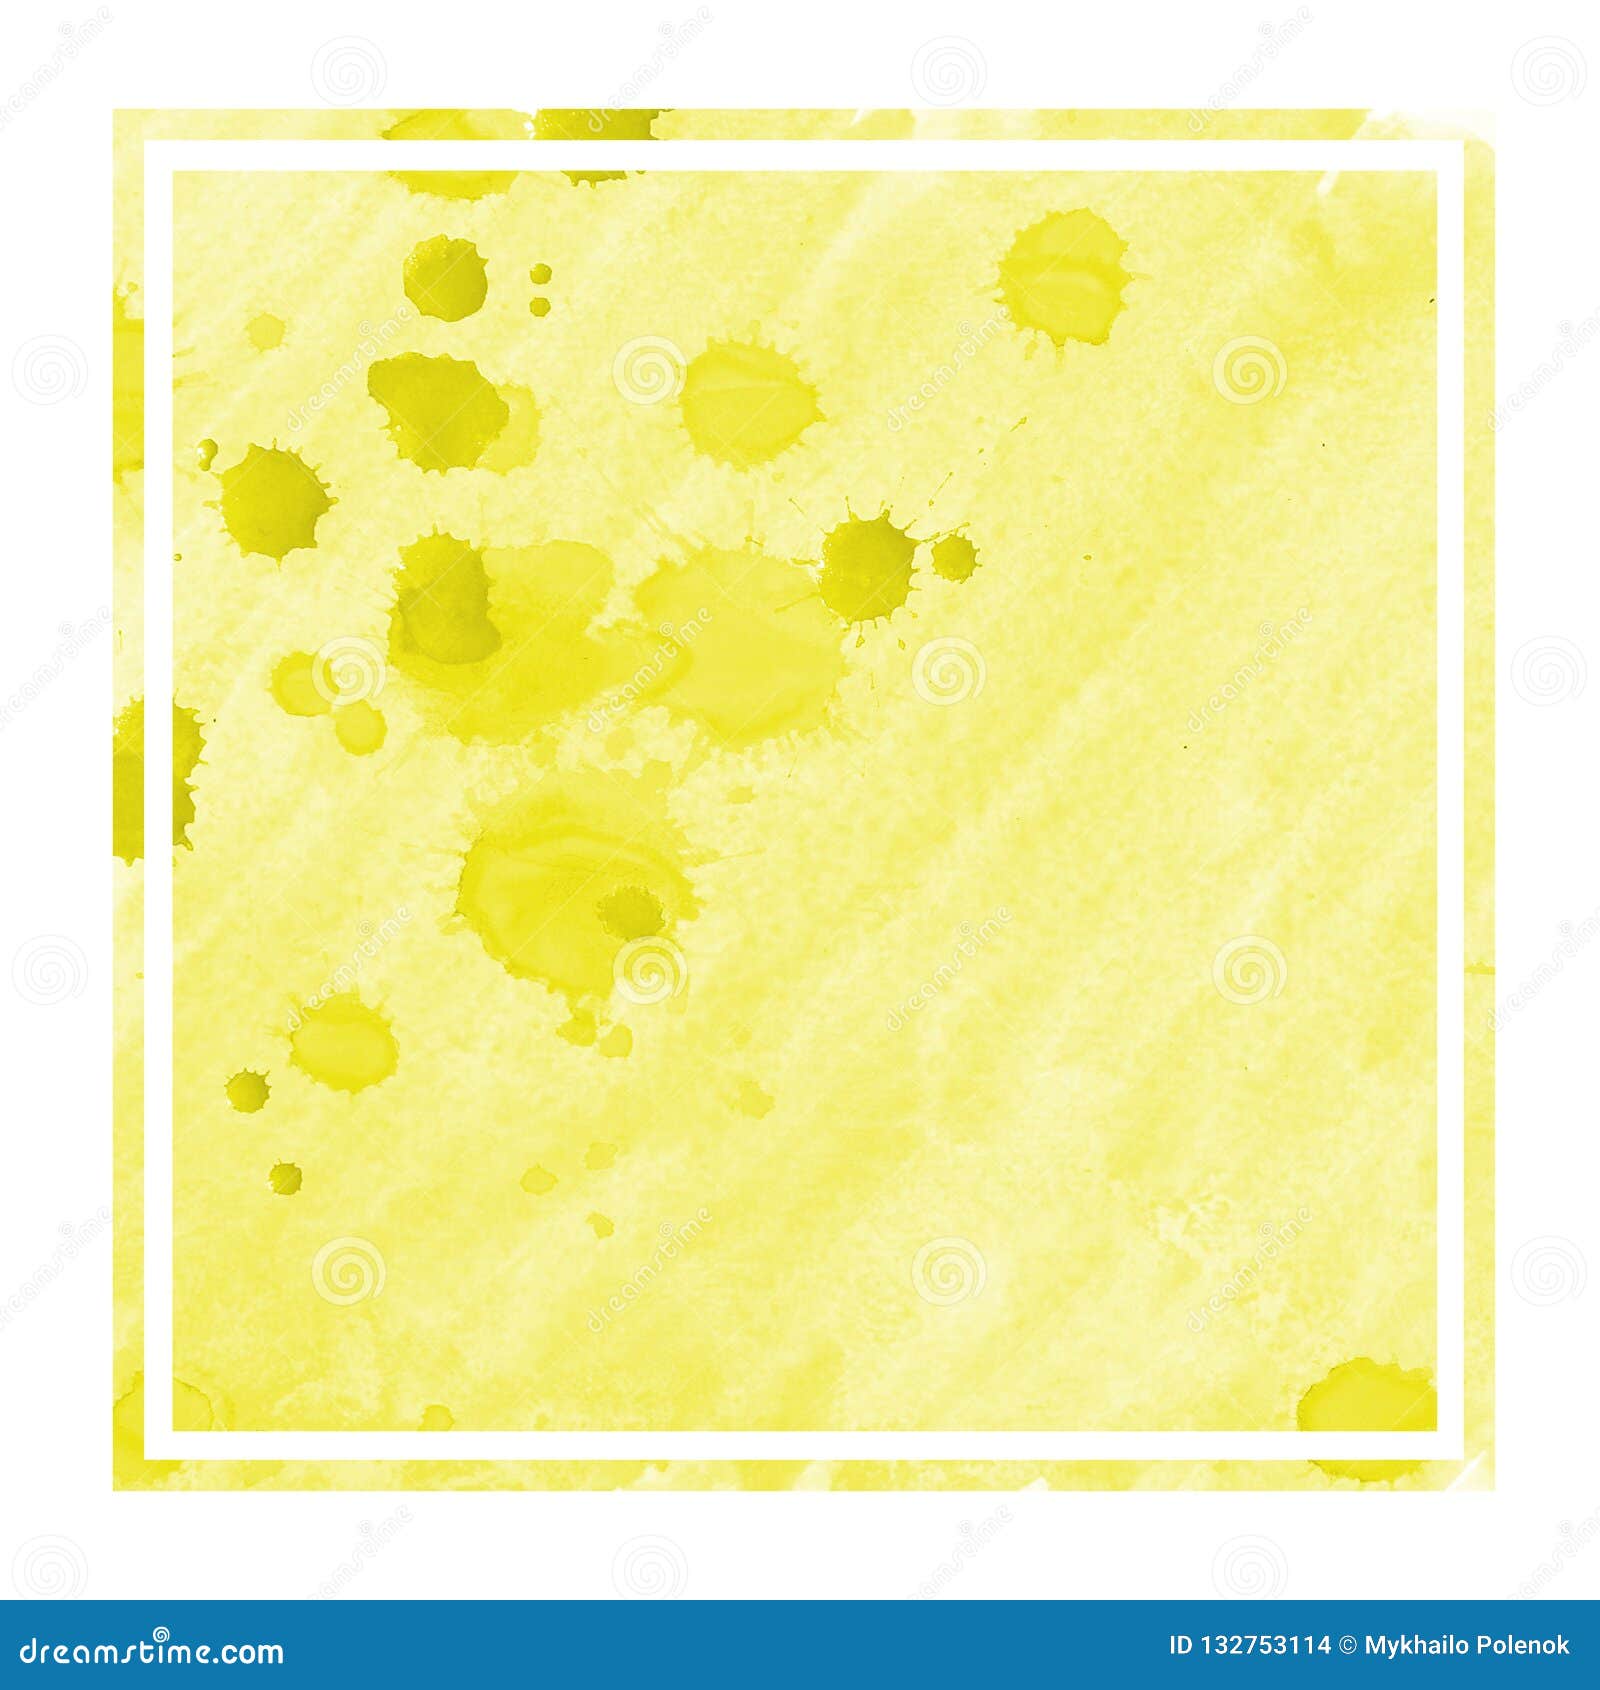 Yellow Hand Drawn Watercolor Rectangular Frame Background Texture with ...